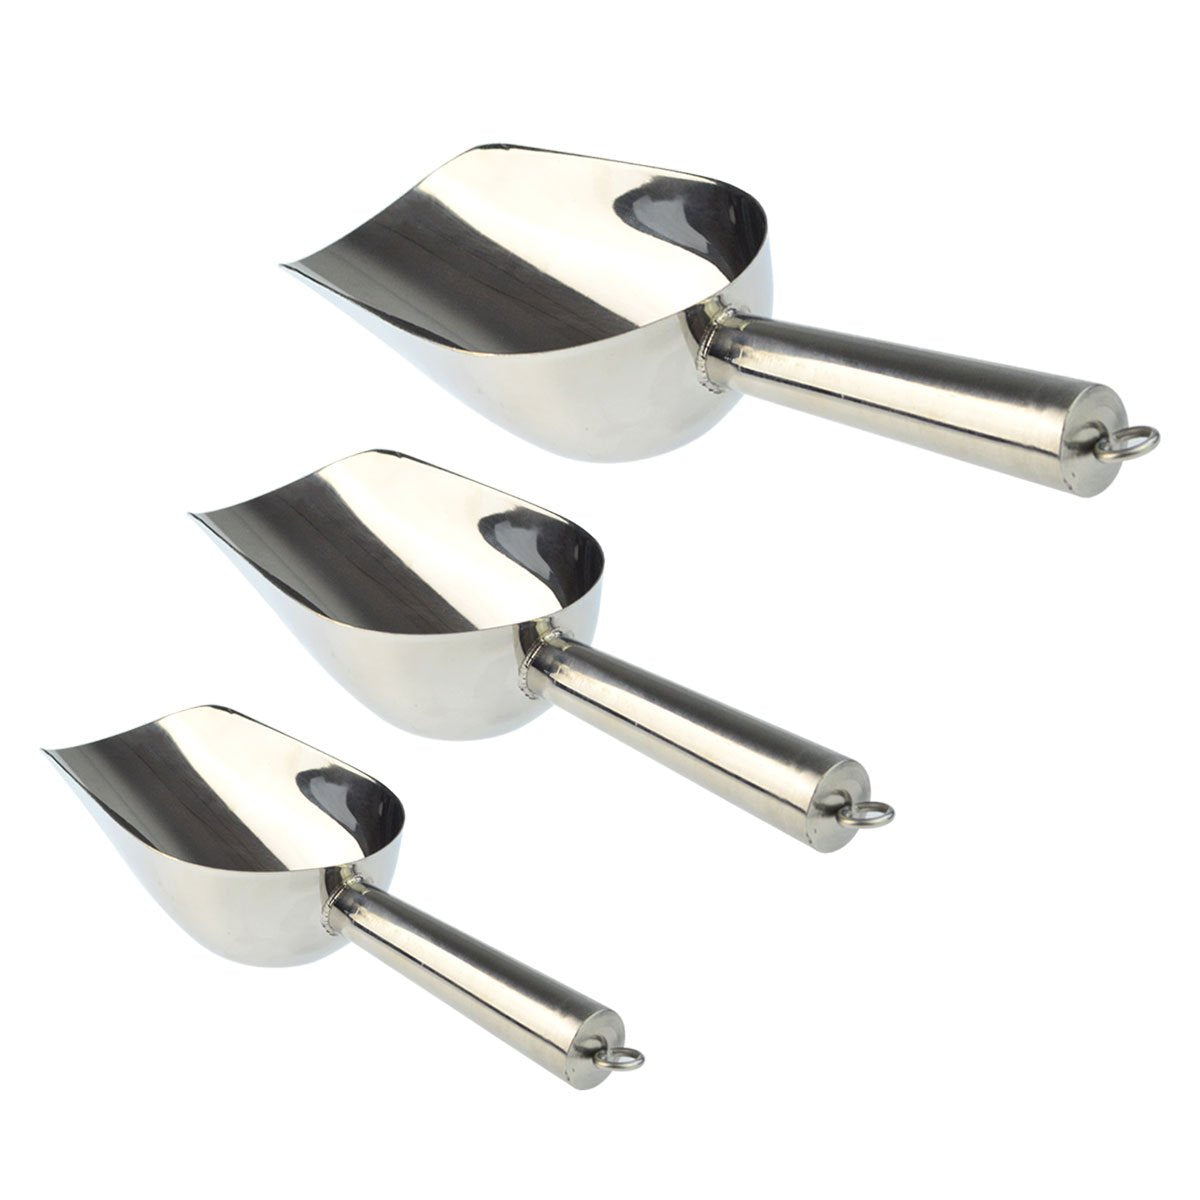 3pcs Ice Scoop, Wobe Stainless Steel Scoops Kitchen Utility Scoops Set Contoured Handle, Ideal for Ice Cube Coffee Bean Food Candy Flour Popcorn Rust Free & Heavy Duty Dishwasher Safe (5-8-12 Ounce)